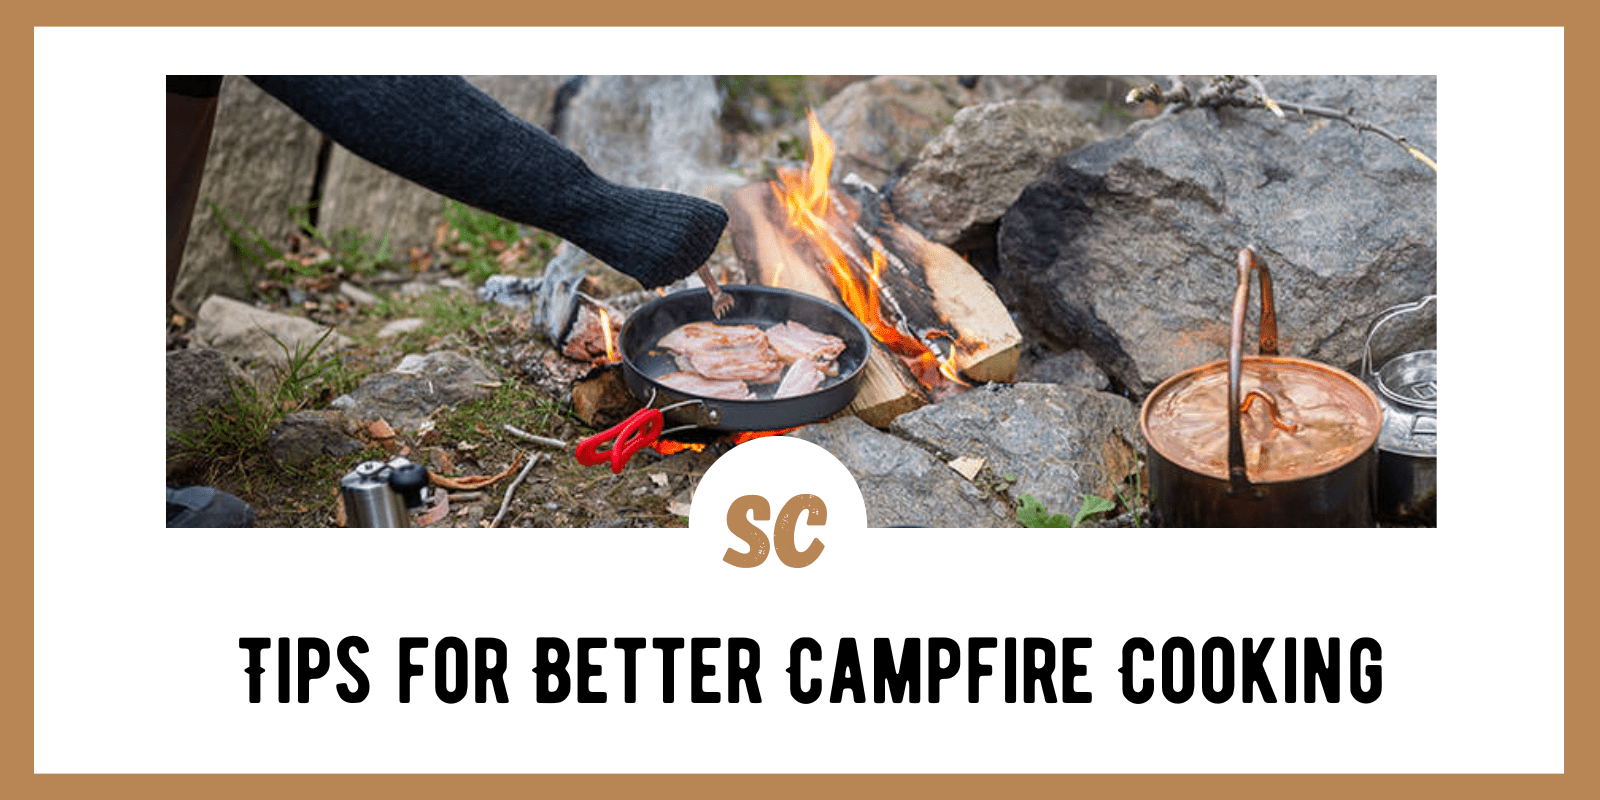 Tips for Better Campfire Cooking